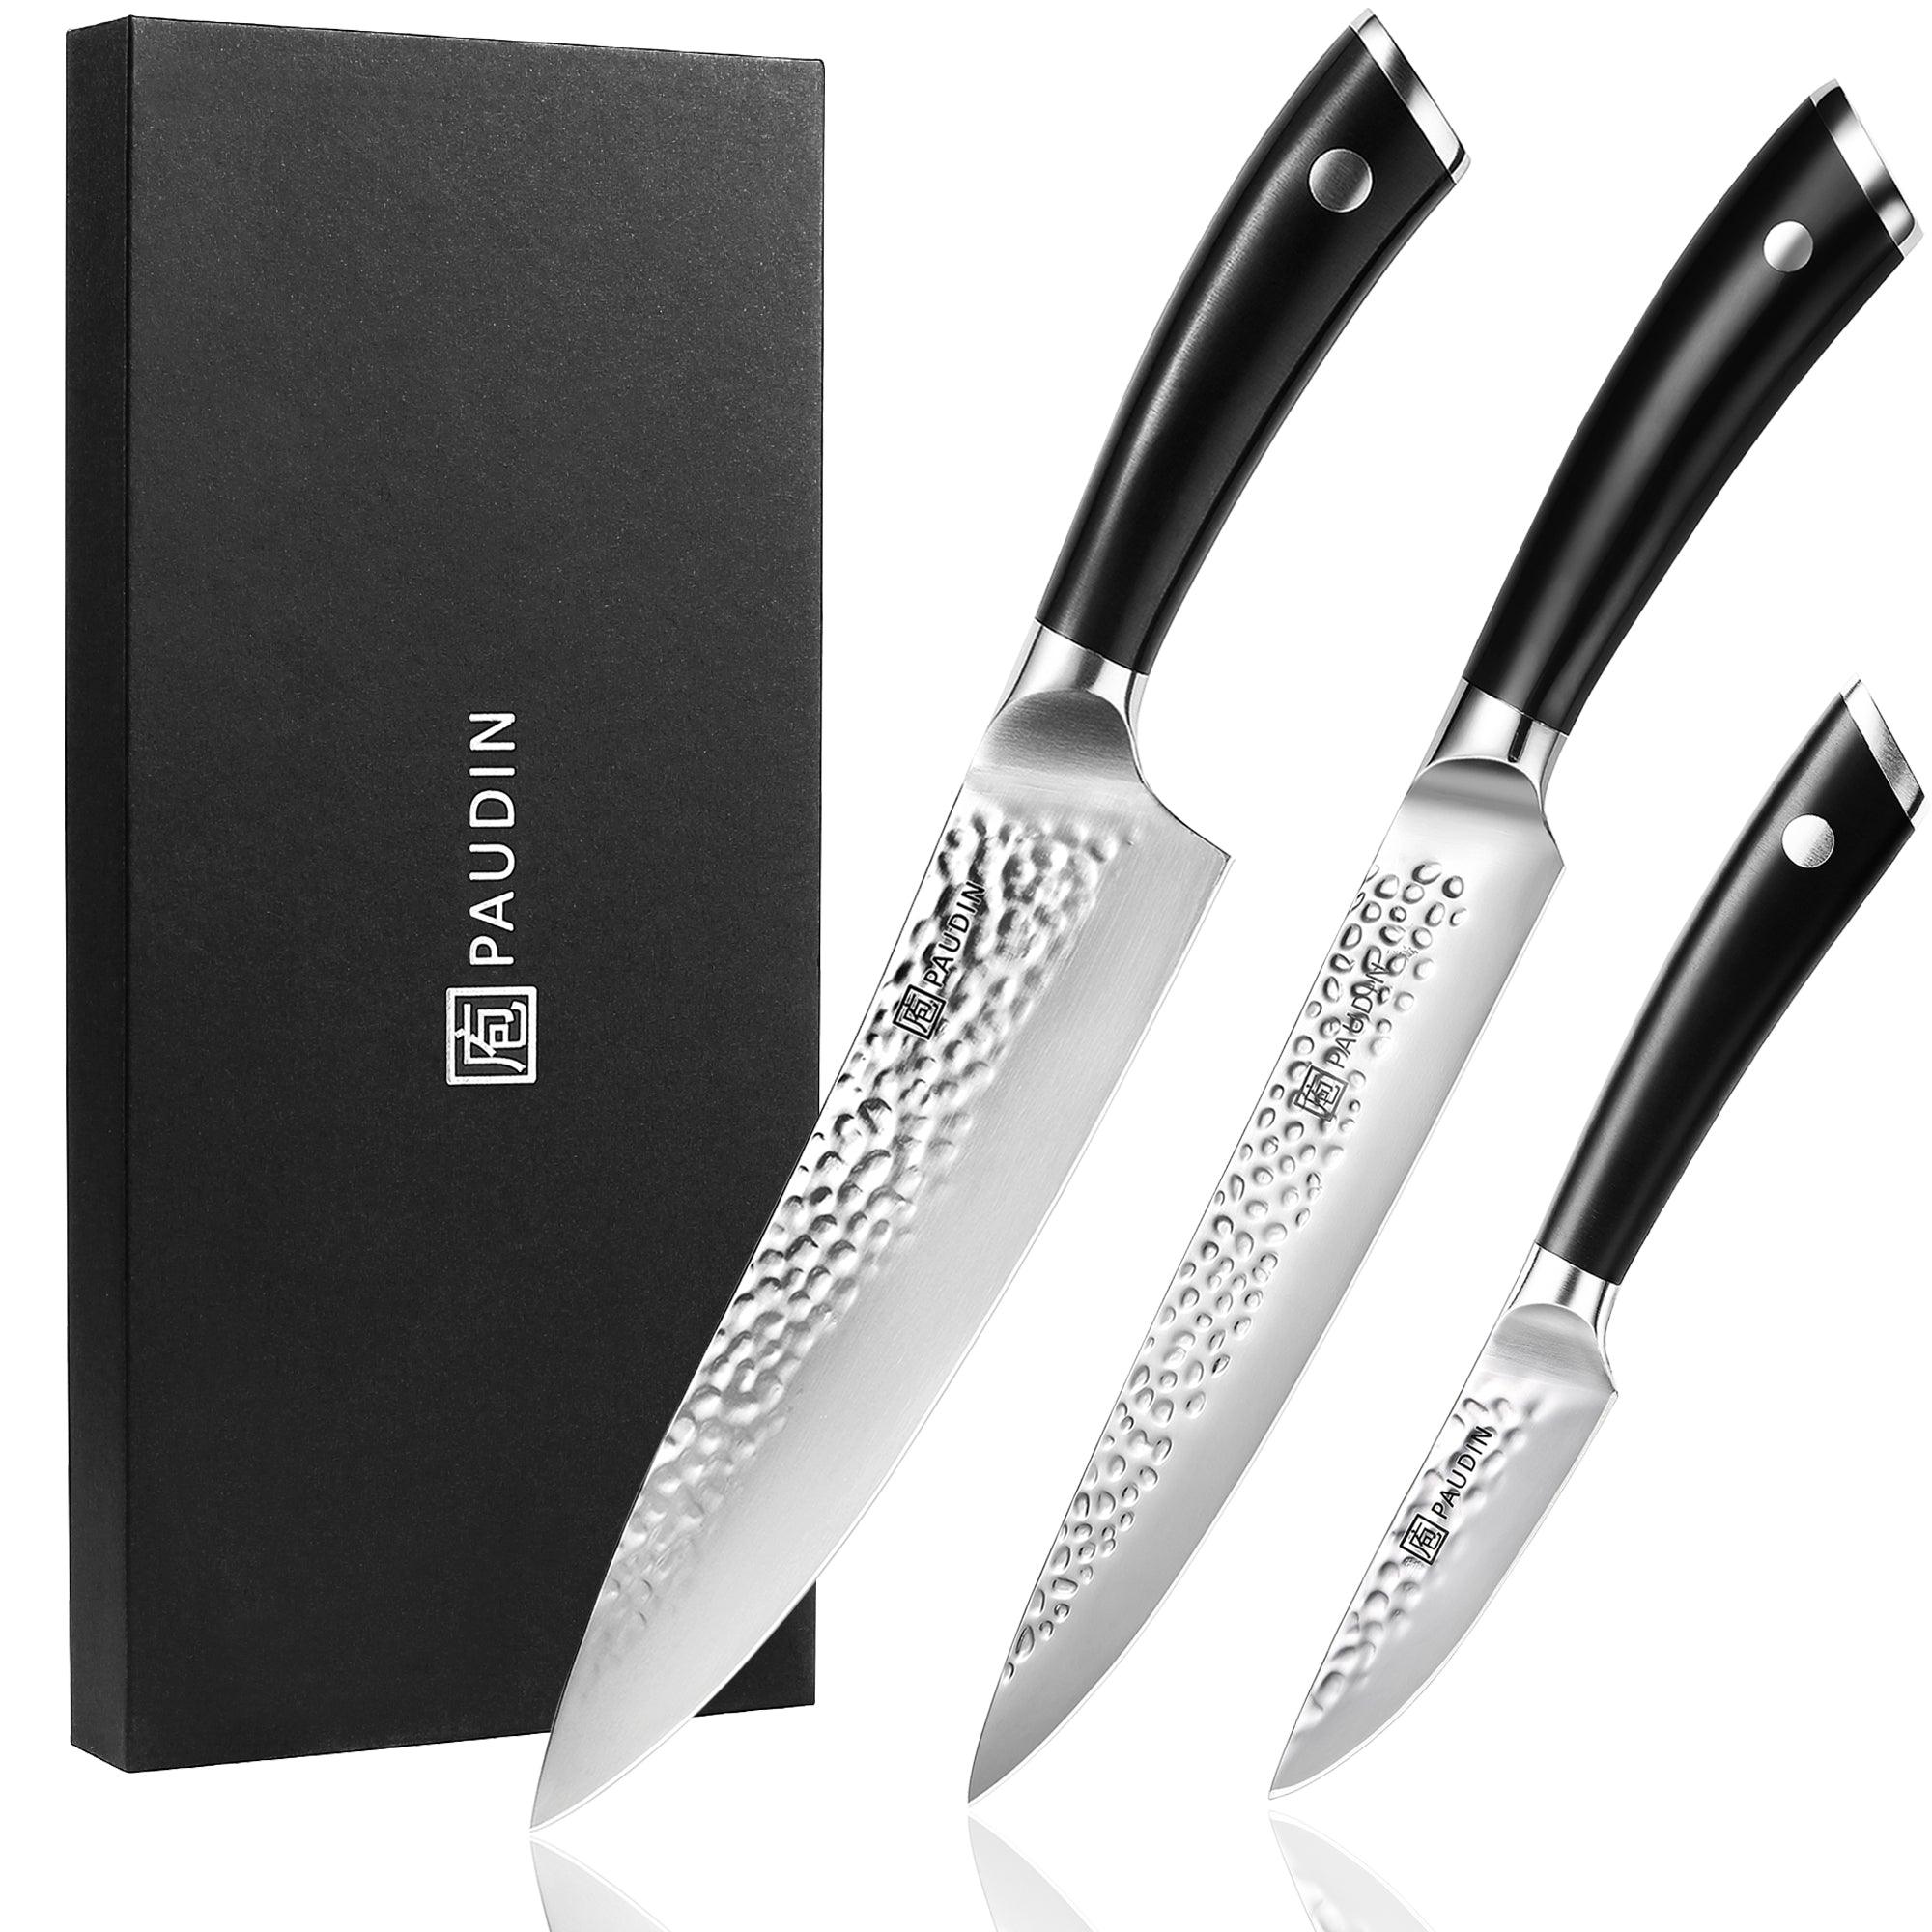 PAUDIN Kitchen Knives Set of 3, Sharp Chef Knife Set with Ergonomic ABS  Handle, High Carbon Stainless Steel Knife Set, Professional Hammered Series